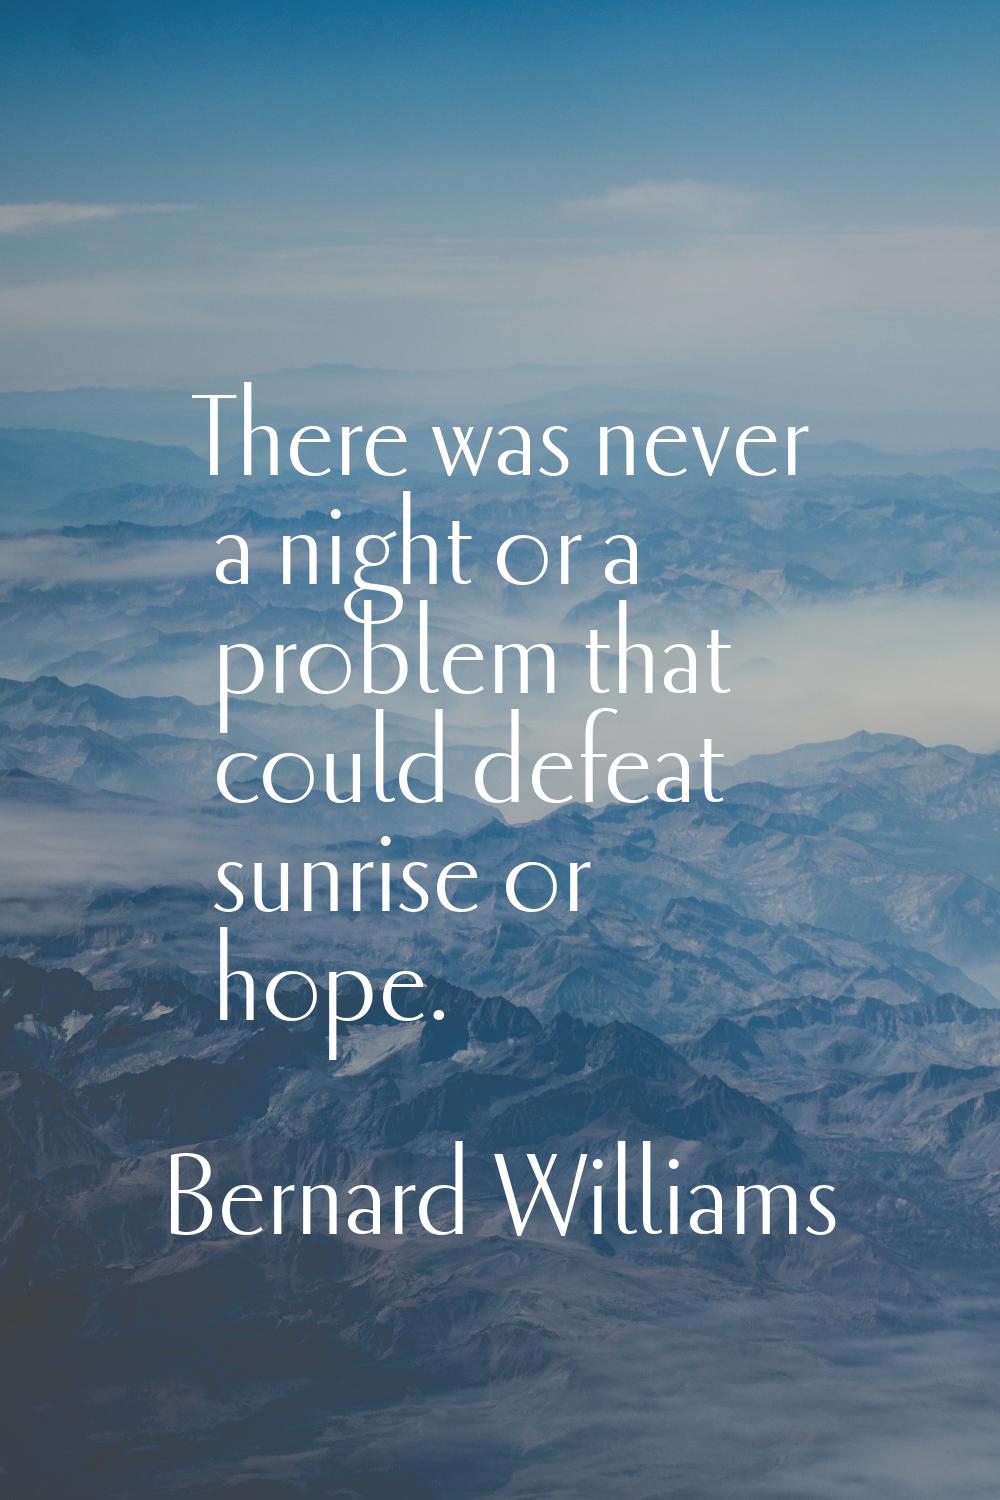 There was never a night or a problem that could defeat sunrise or hope.